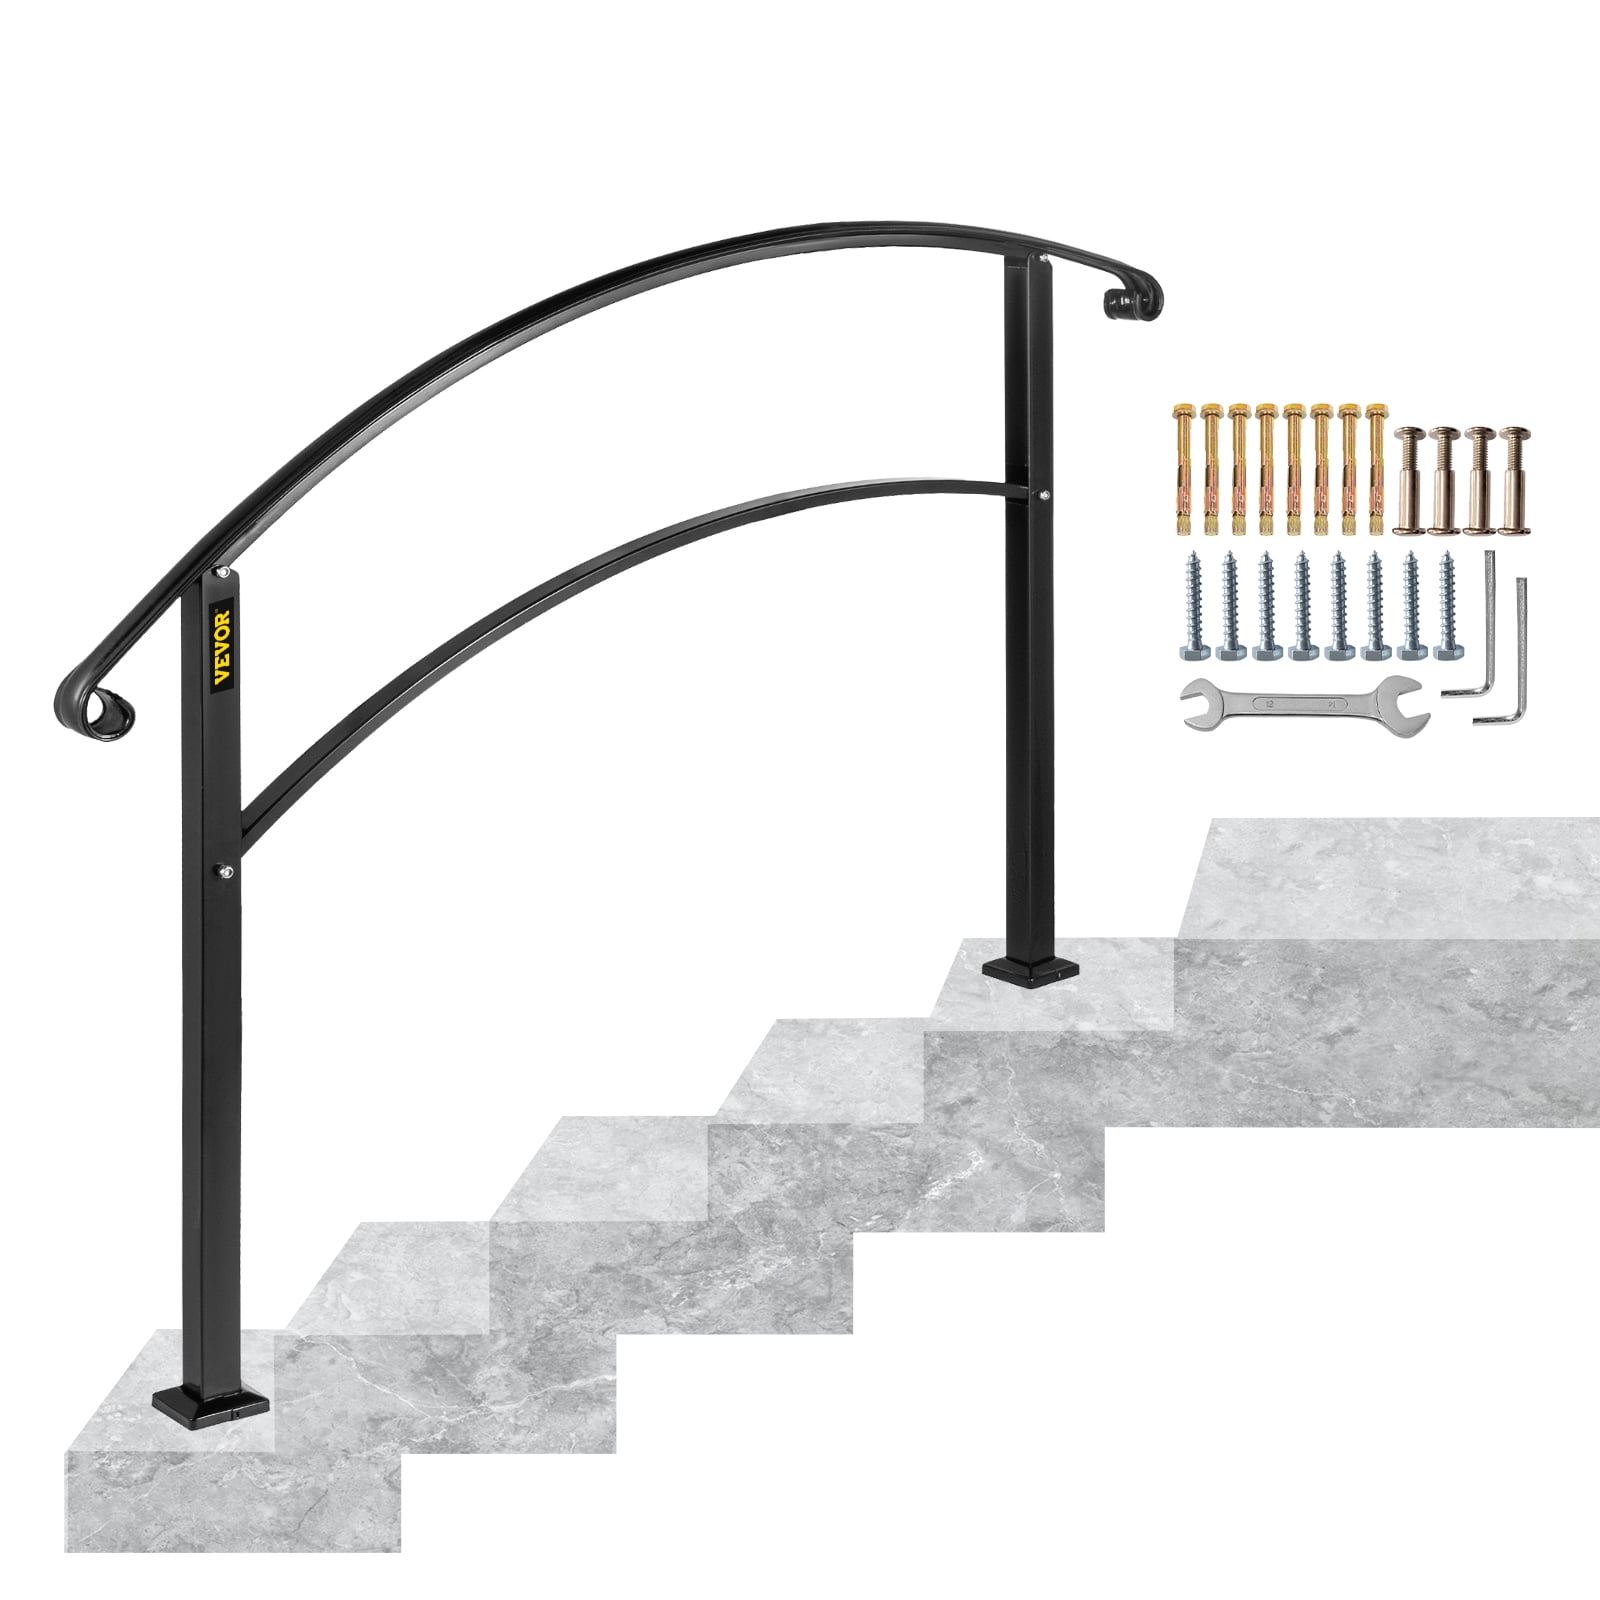 Happybuy Stair Handrail Five Step Stair Rail 5ft Length Modern Handrails for Stairs Black Wrought Iron Indoor Handrail for Stairs 200lbs Capacity Wall Mounted Stairway Railing with Brackets